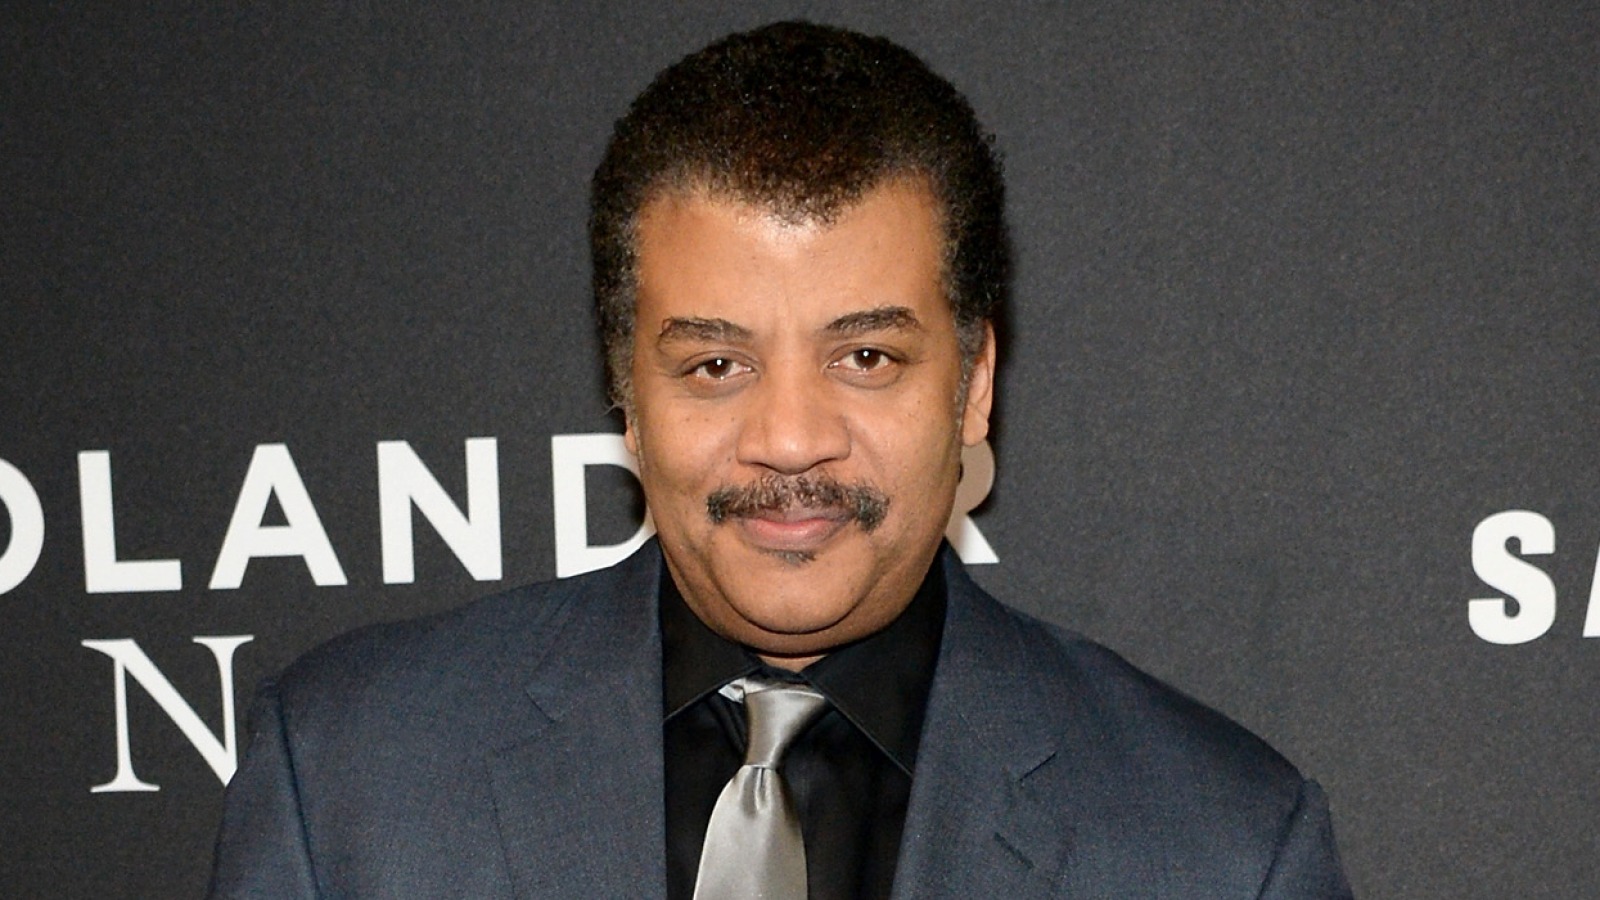 Neil deGrasse Tyson Shares An Apocalyptic PreElection Warning